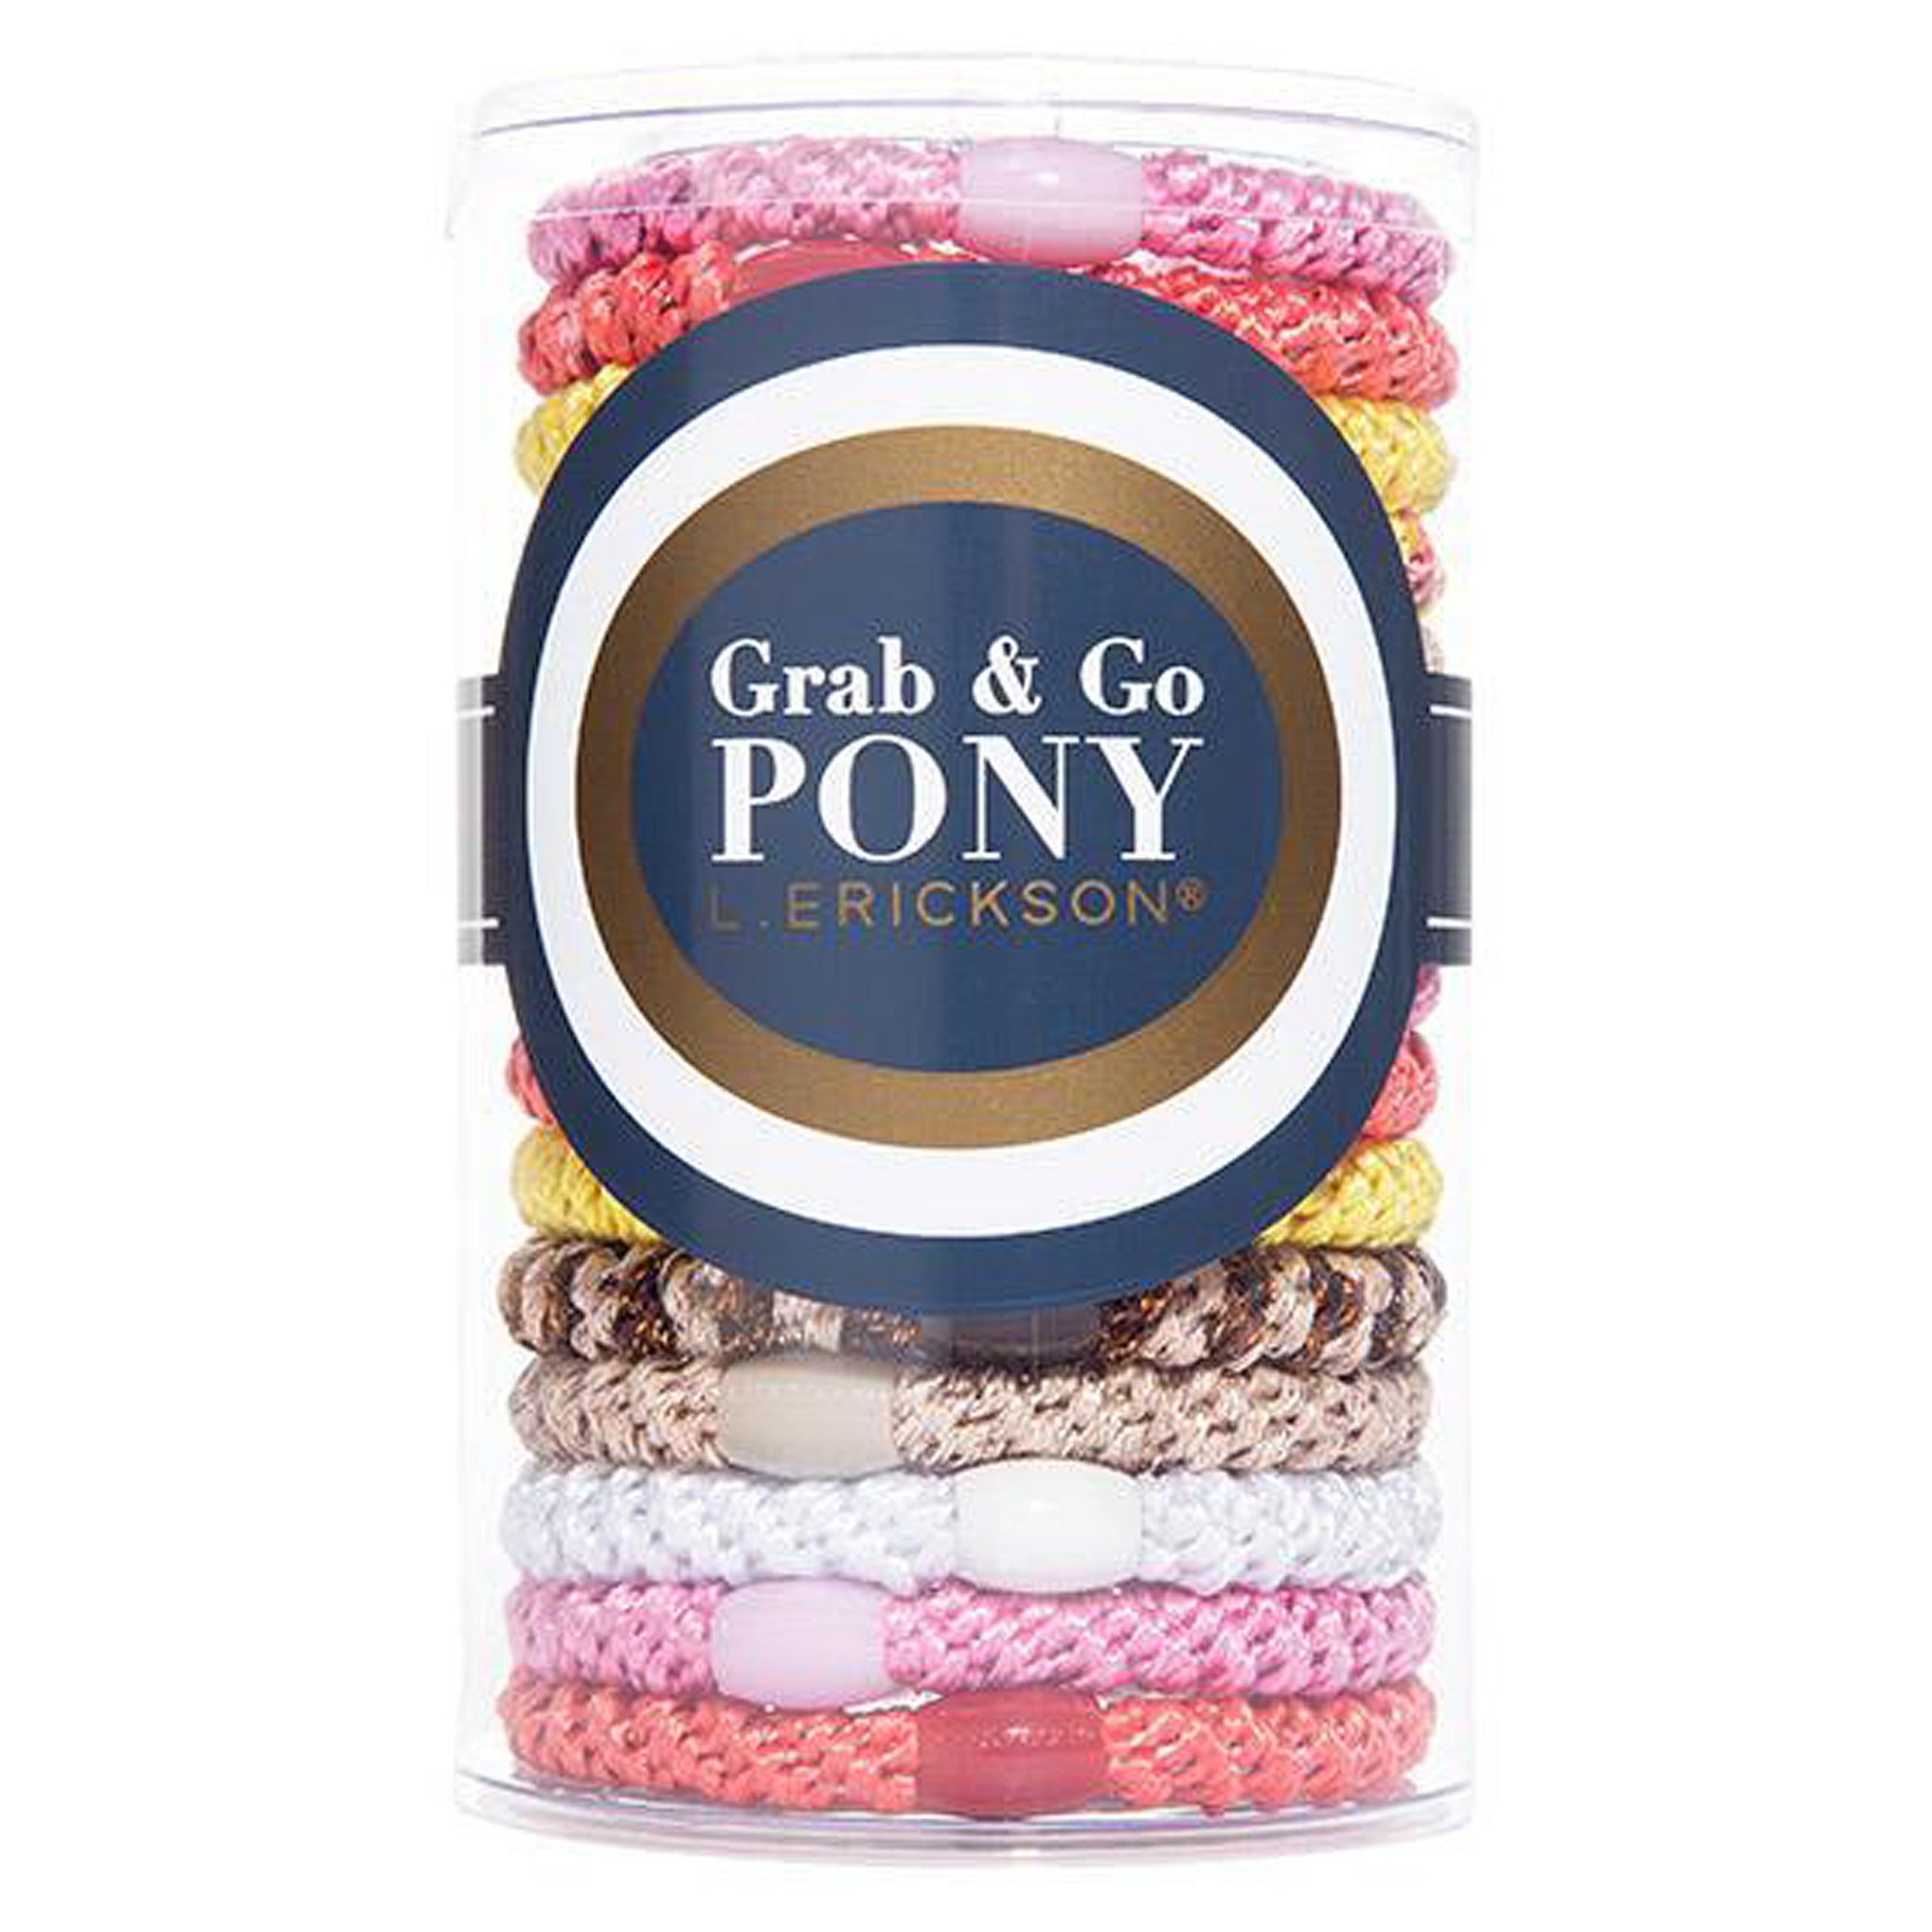 L. Erickson Grab and Go Pony Tube Hair Ties in Molokini 15 Pack